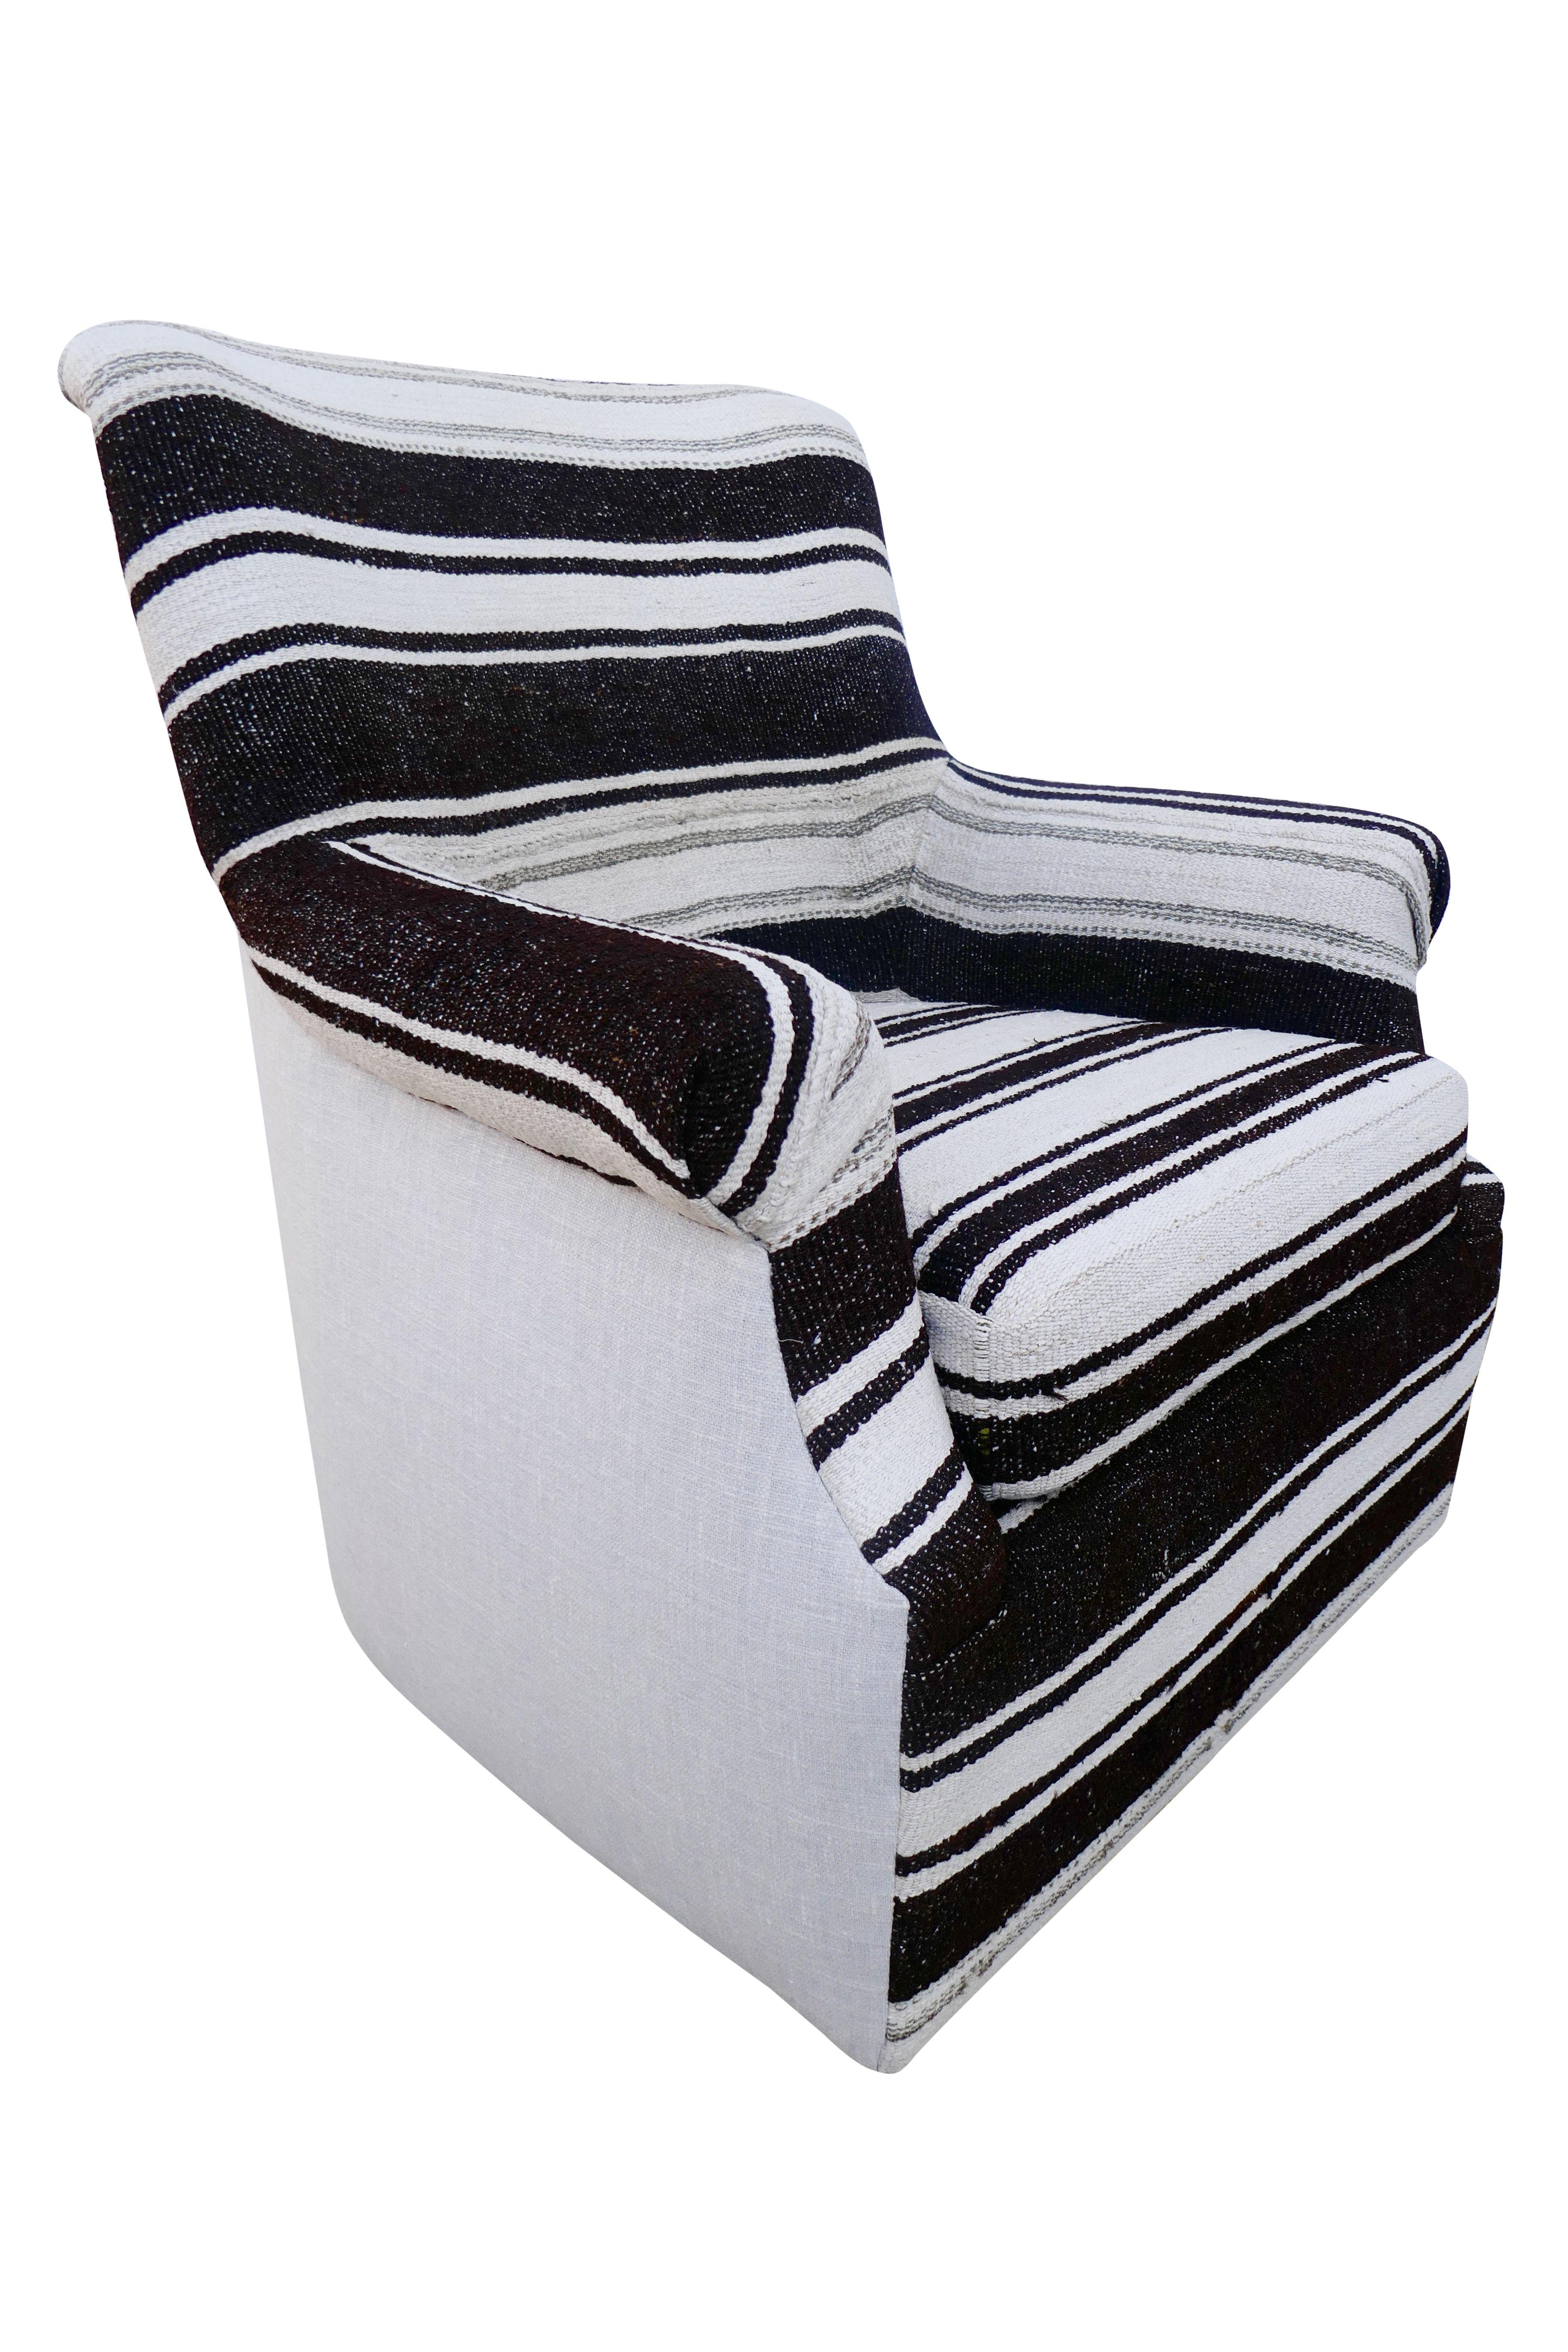 One-of-a-kind swivel club chair in vintage Berber tribal striped Kilim wool. Impeccably upholstered in authentic vintage (circa 1960's) Berber handwoven textile. Heavy texture created from organic hemp, wool and goat-hair in natural & espresso tones